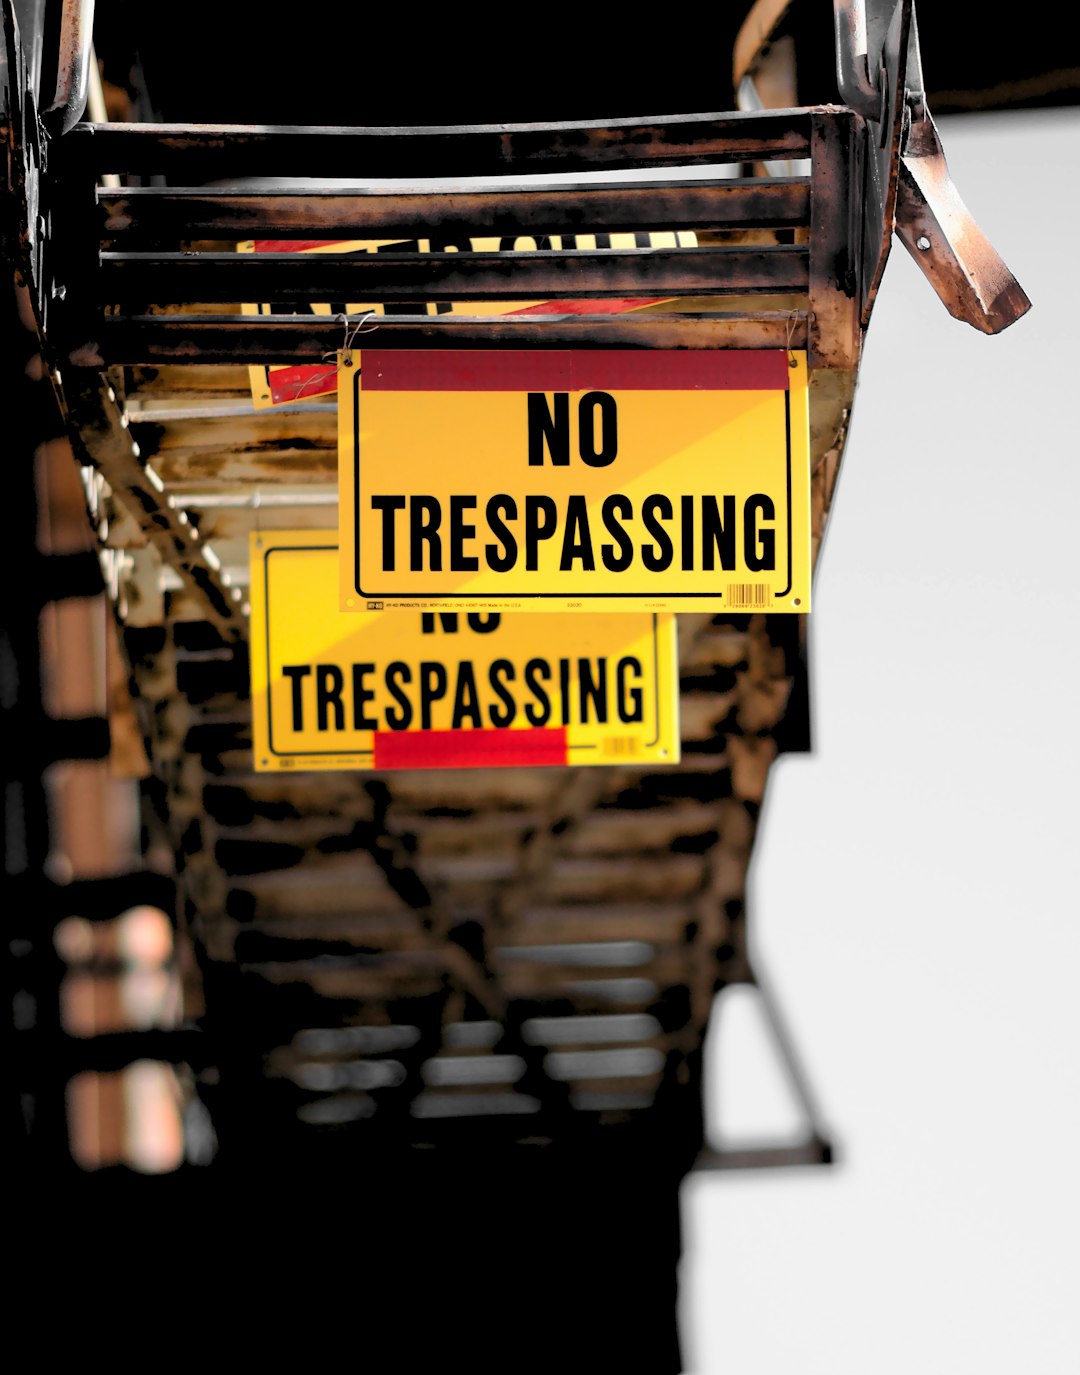 These NO TRESPASSING signs are hanging from a fire escape on a downtown building.